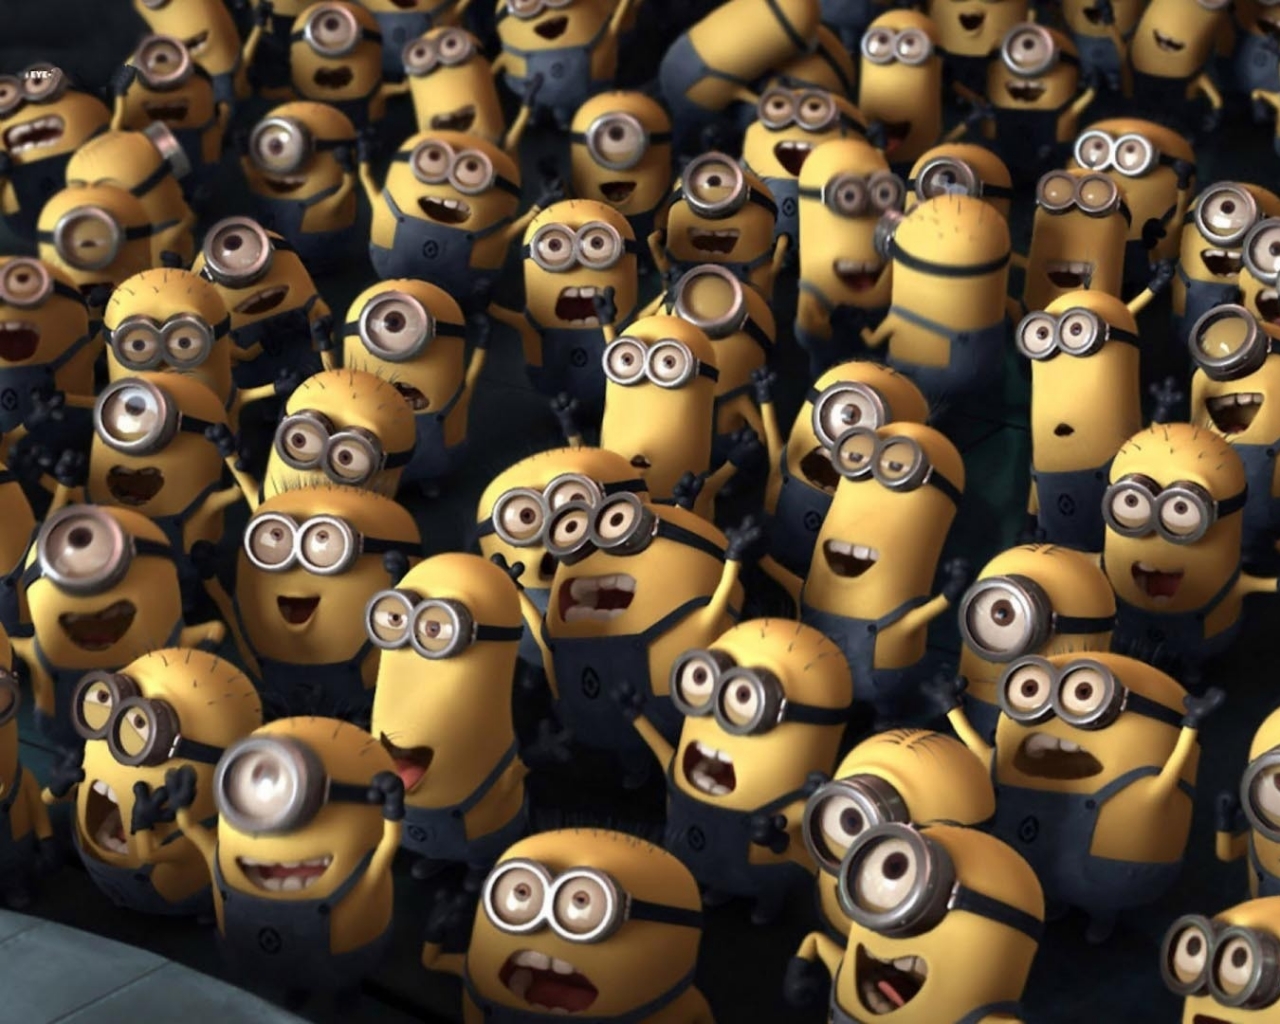 Despicable Me Minions Live For Android At Wallpaper Rainpow